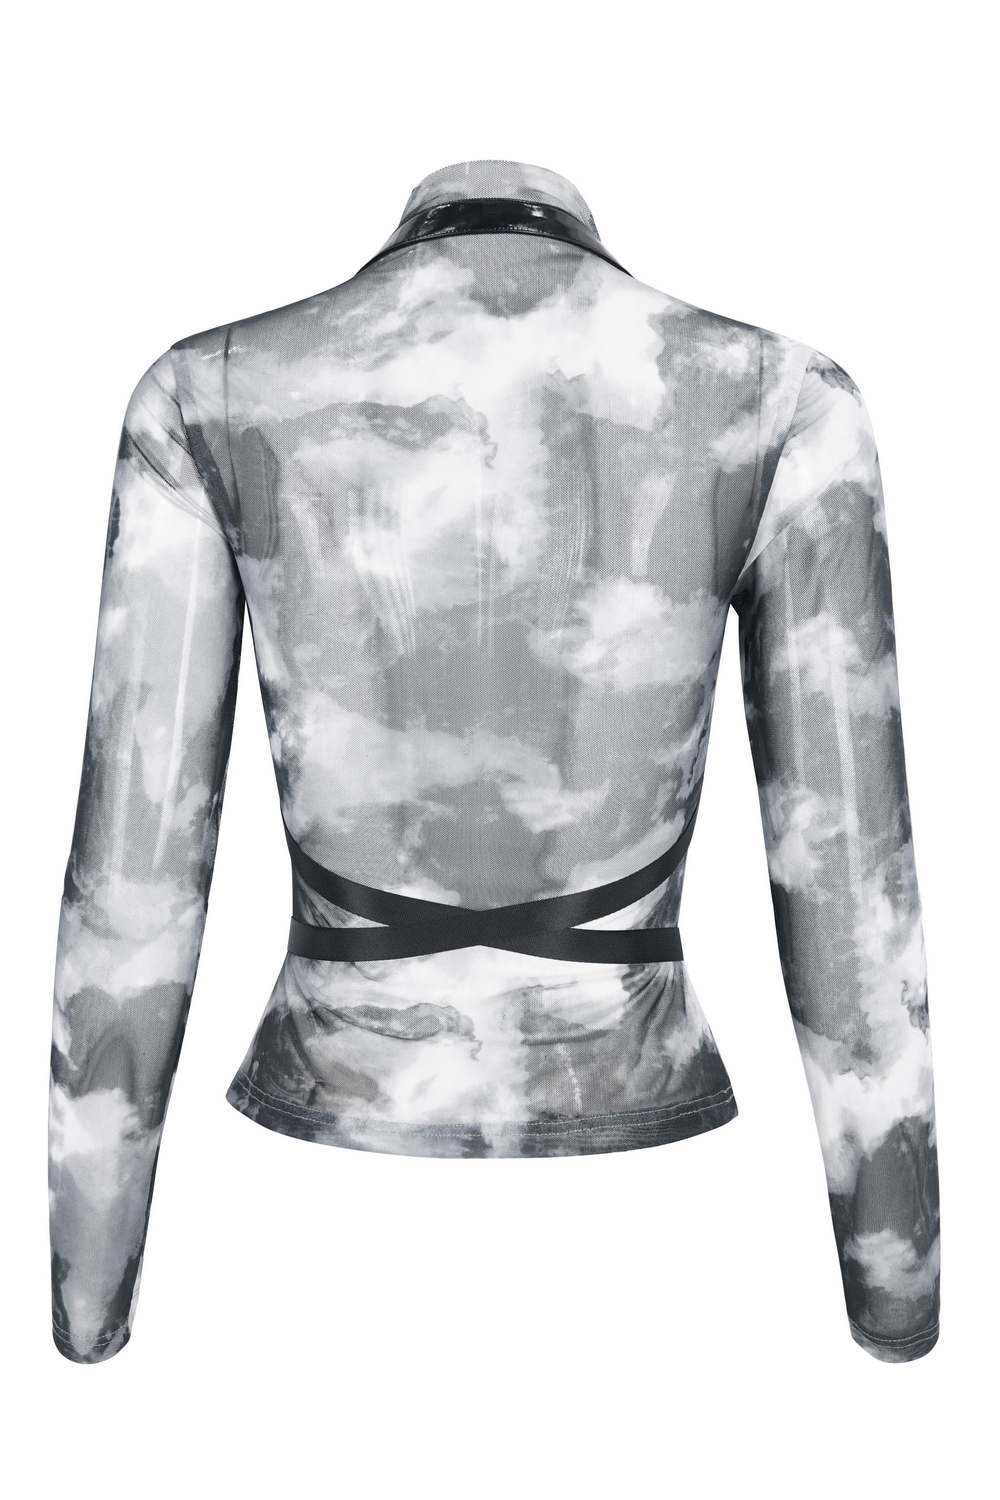 Edgy Female Tie-Dye Top with Riveted Harness Detail